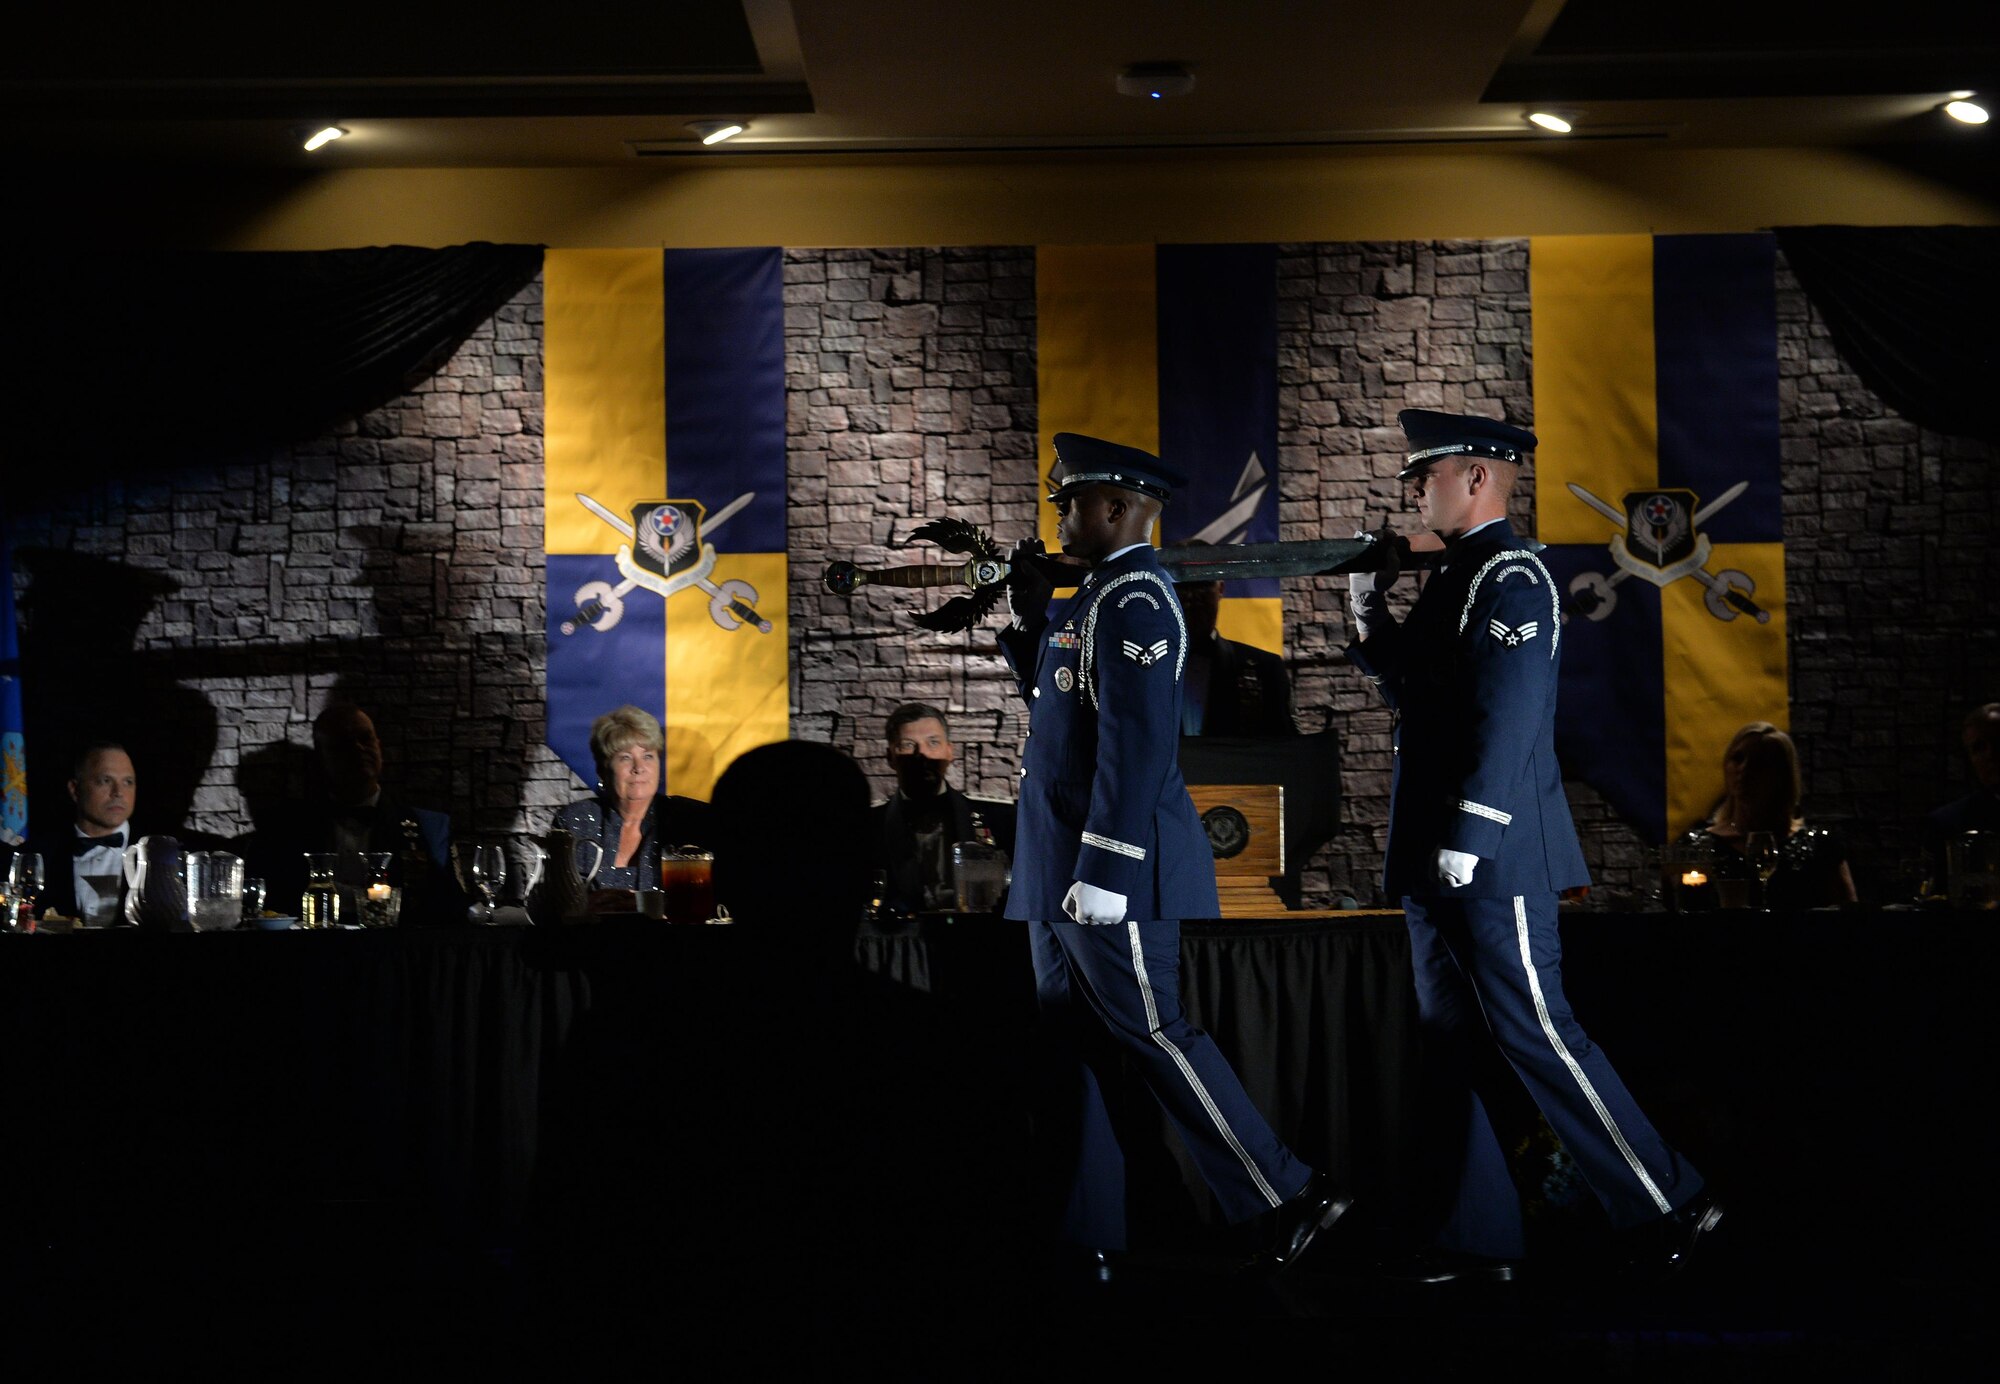 Hurlburt Field Honor Guard members carry the sword used for the Order of the Sword ceremony at Hurlburt Field Fla., Nov. 18, 2016. The Order of the Sword is the highest and most prestigious award that can be given to an officer by enlisted military members. (U.S. Air Force photo by Senior Airman Andrea Posey)